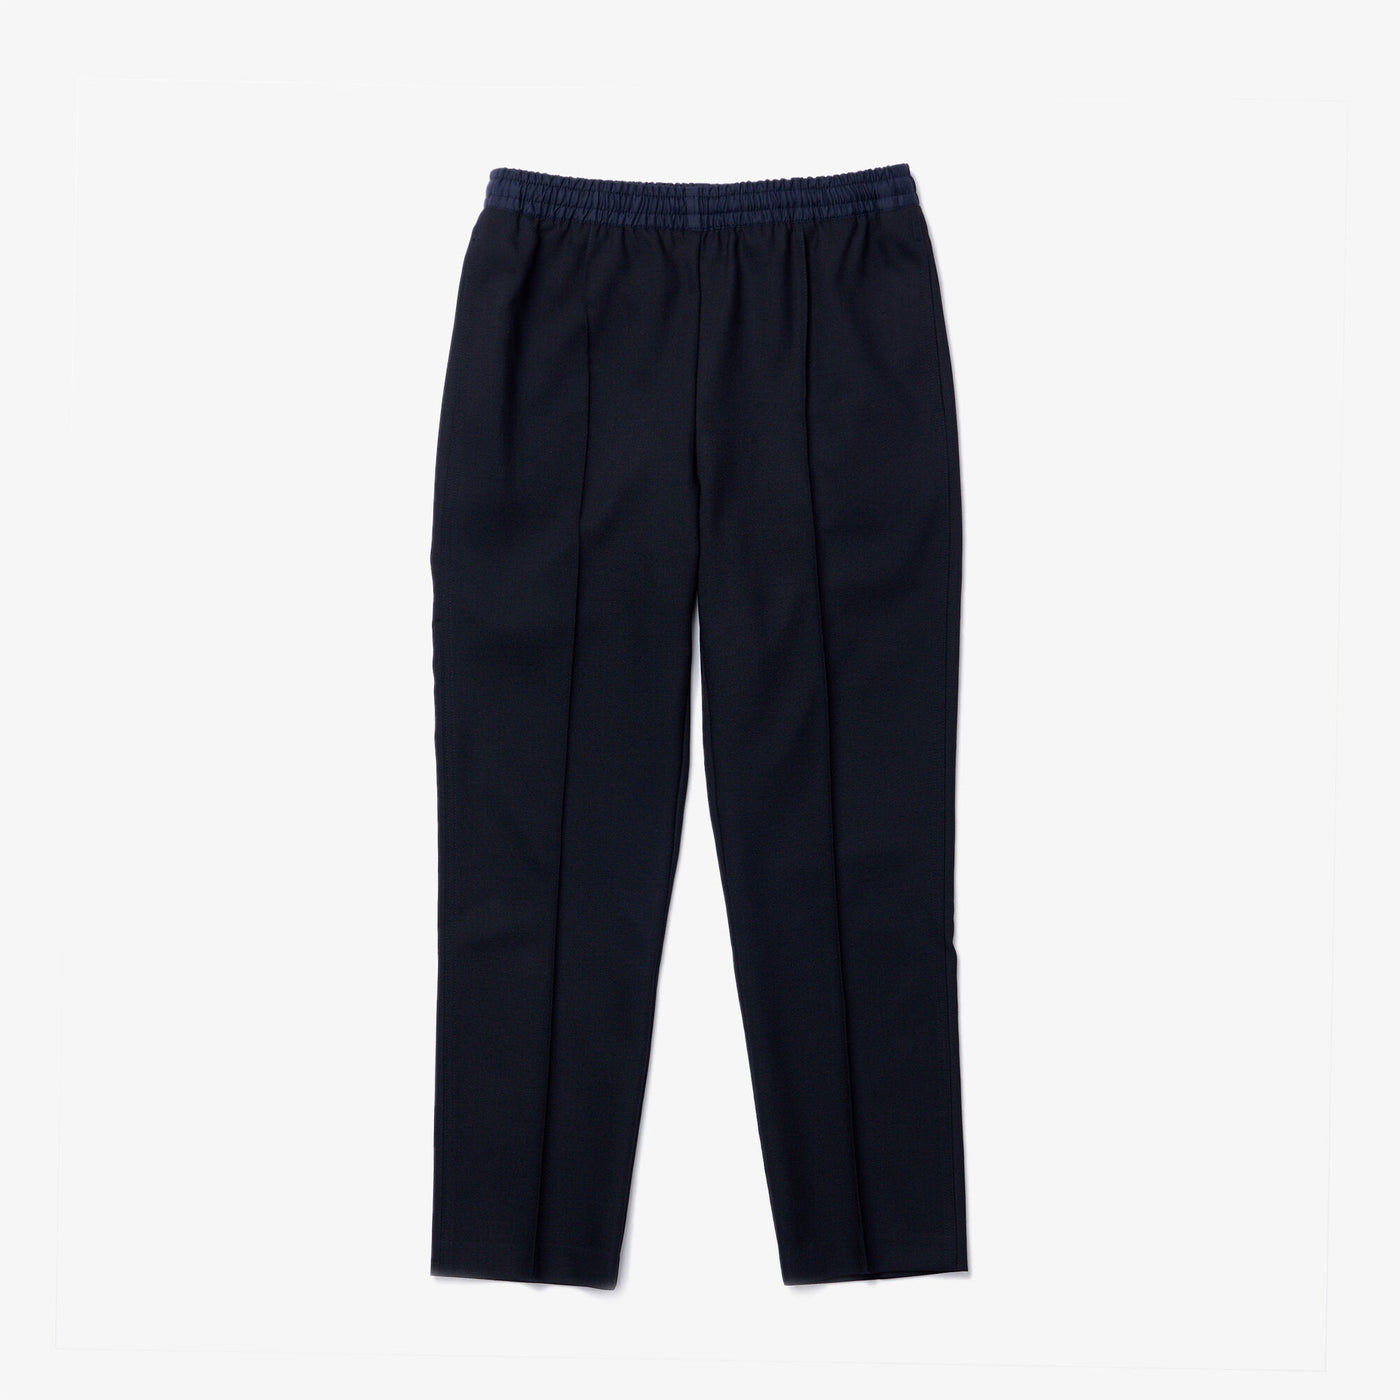 Shop The Latest Collection Of Lacoste Trousers - Hf0747 In Lebanon